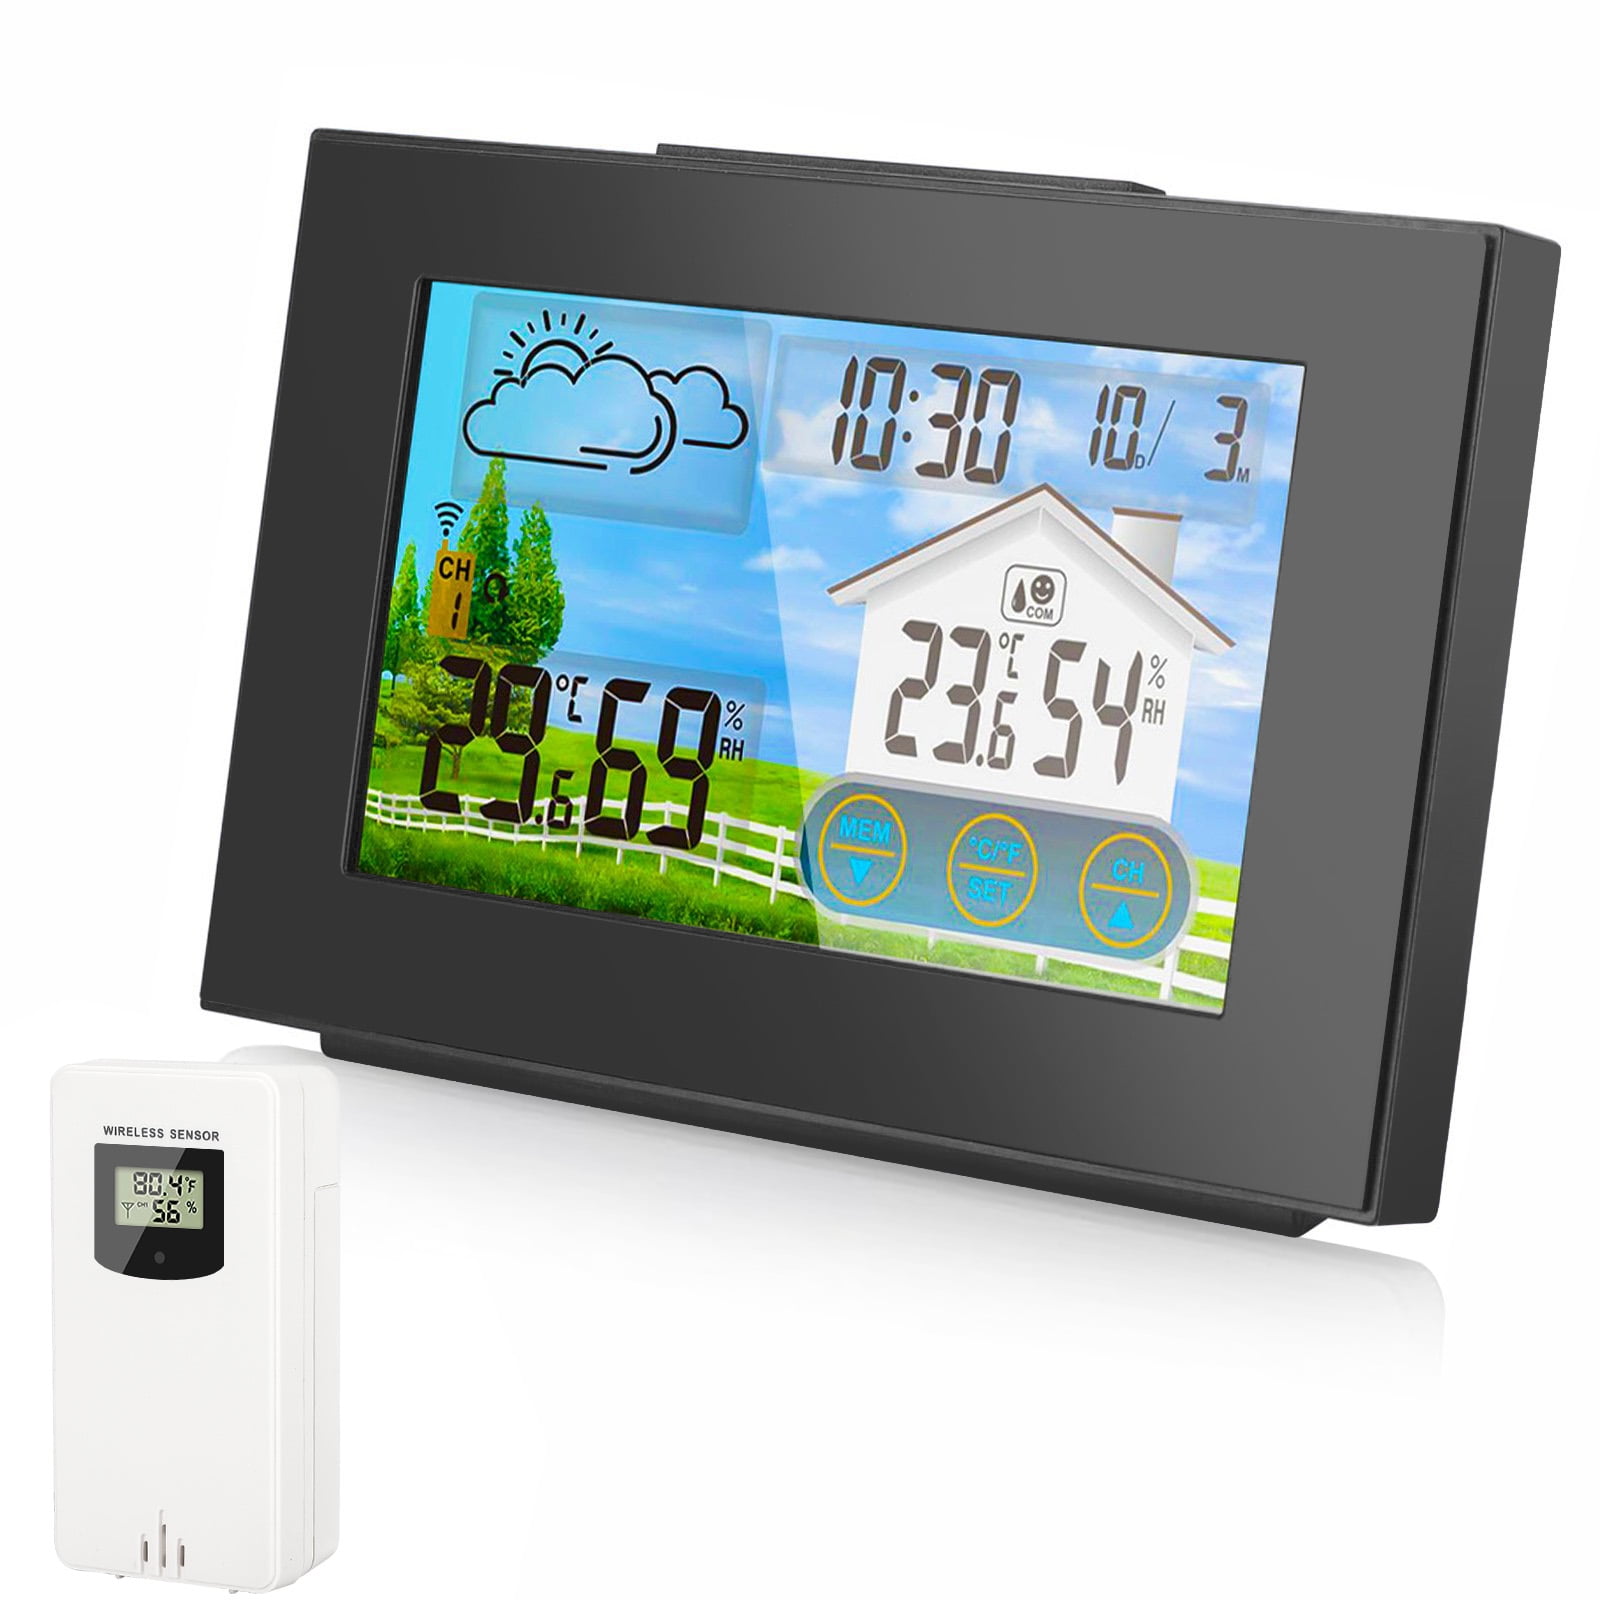 Digital LCD Indoor/ Outdoor Wireless Weather Station w/ Sensor Thermometer Good 